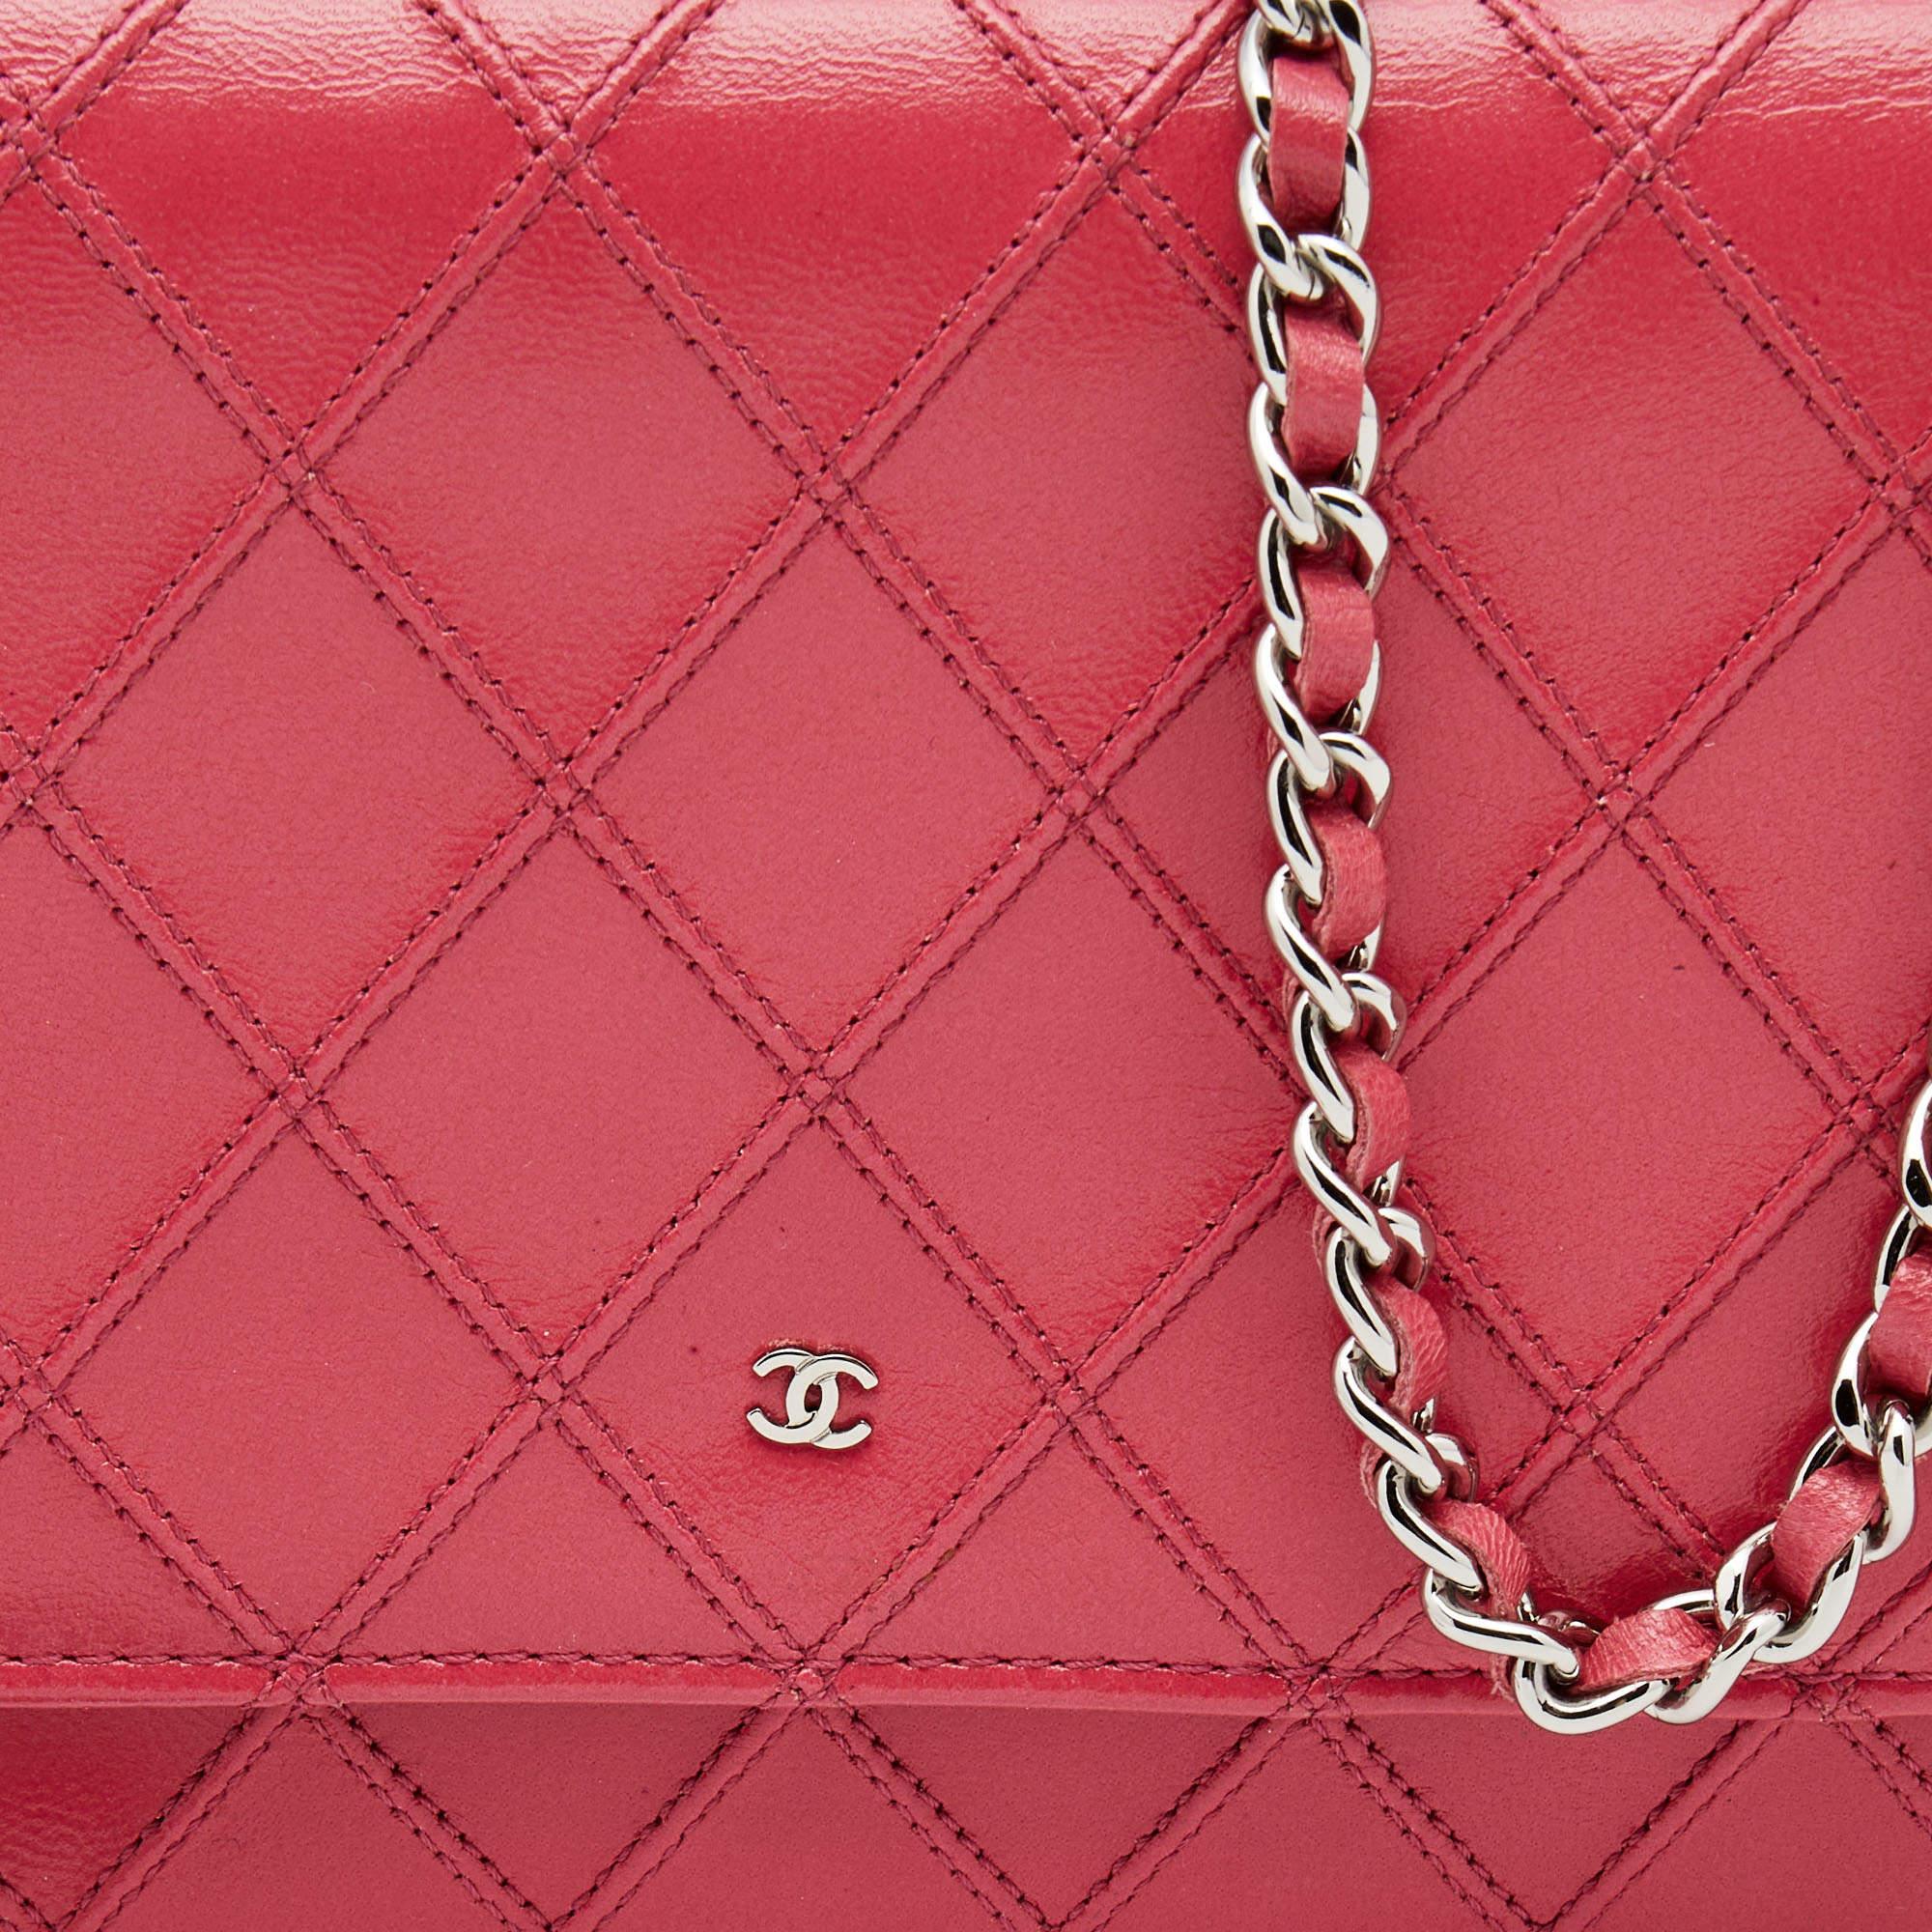 Chanel Pink Quilted Leather WOC Bag For Sale 7